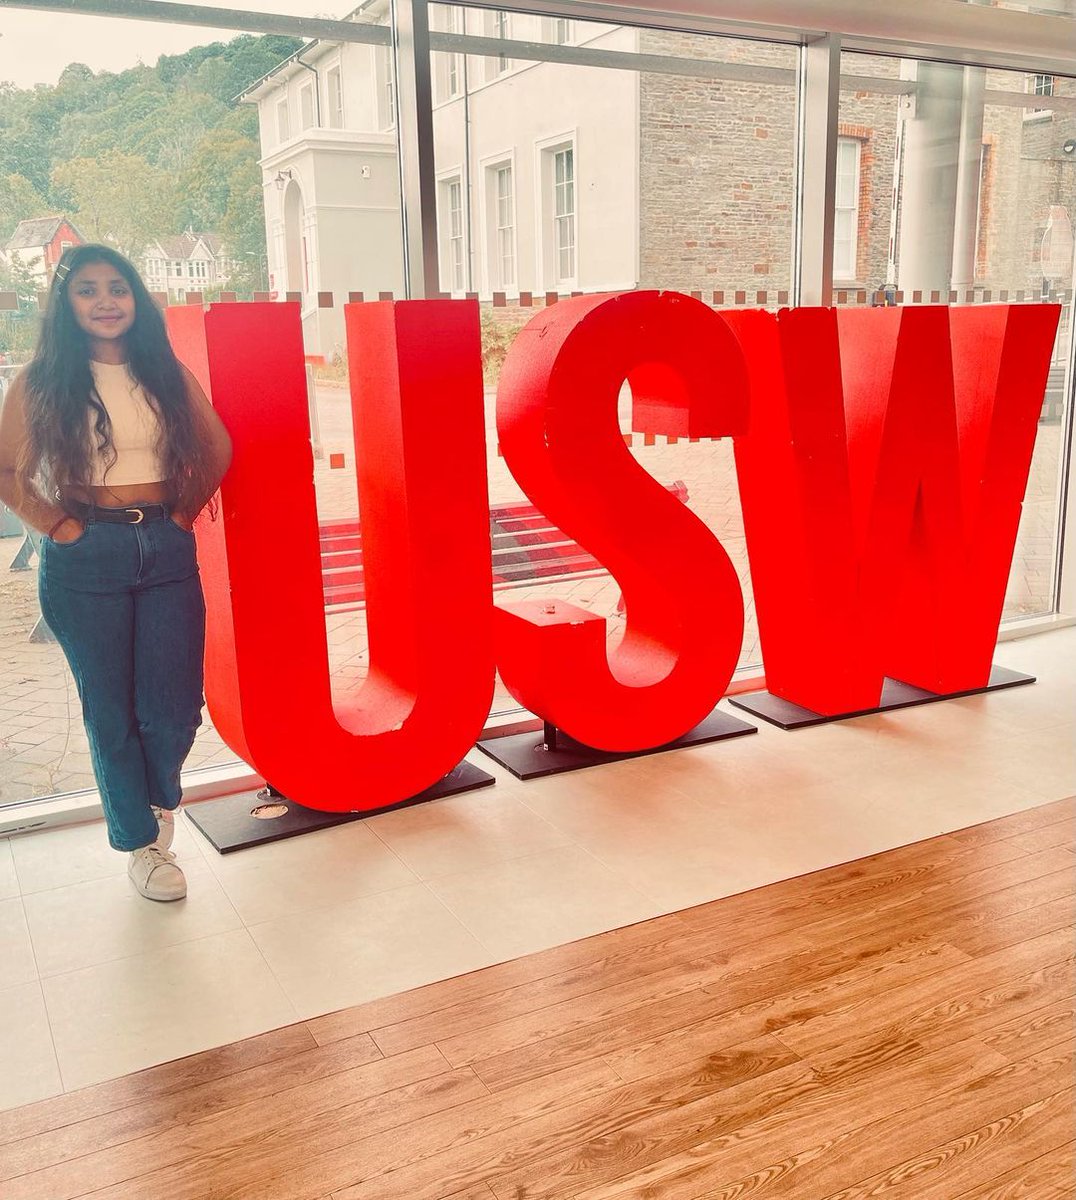 Ready to join the #USWfamily this September? Be met with a friendly face as soon as you touch down in the UK by registering for our FREE arrival services✈️ Learn more👉 orlo.uk/arrivalservice…